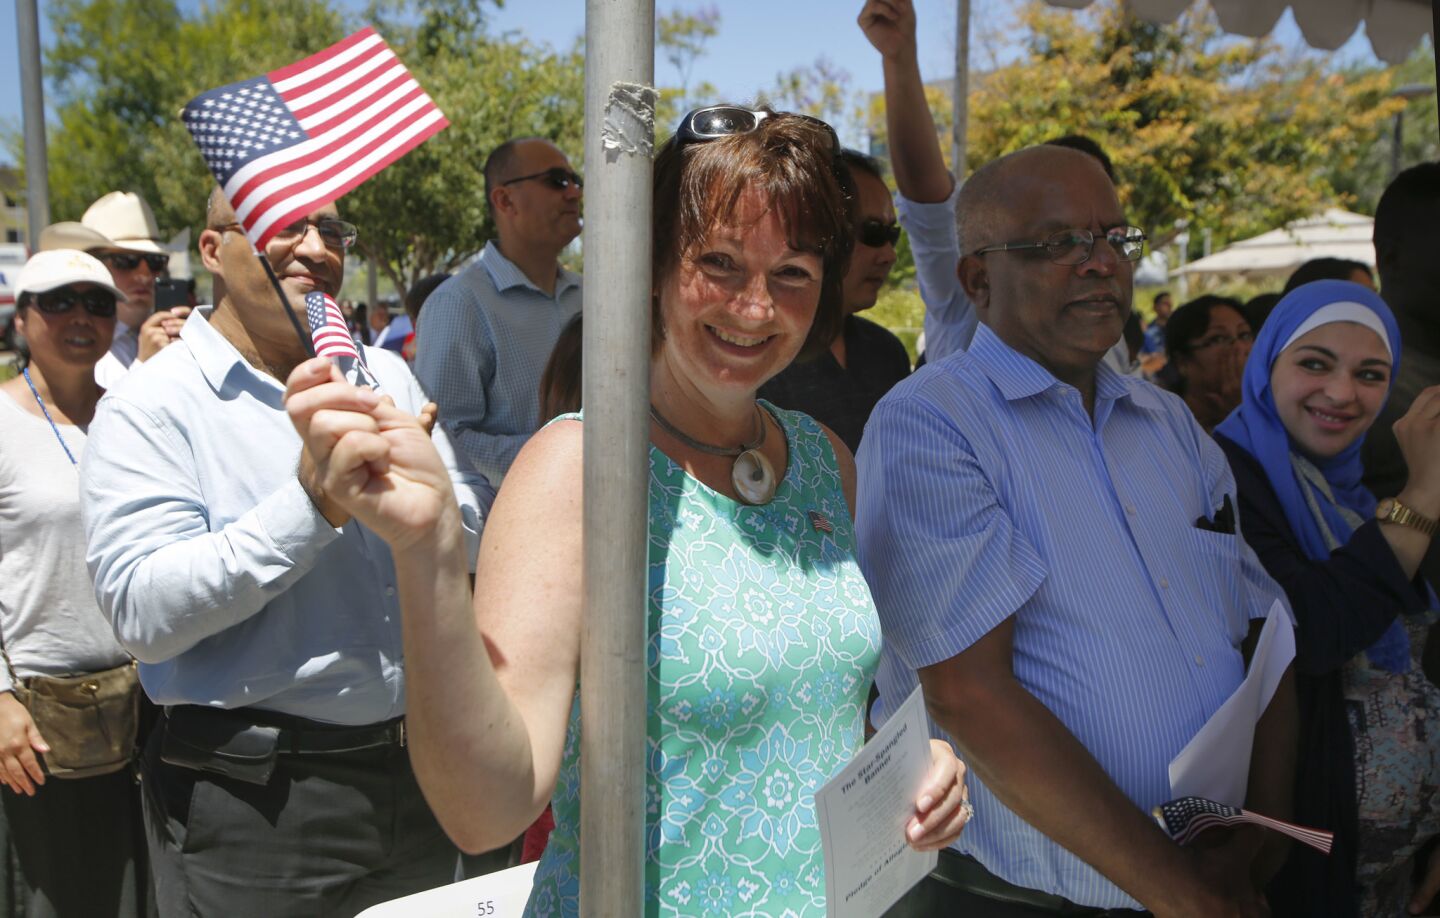 Jean Dustan, originally from the United Kingdom was one of about 100 people from about 54 countries who took the Oath of Allegiance to the United States of America and became U.S. citizens during a naturalization ceremony held in Centennial Plaza near El Cajon City Hall to kickoff El Cajon's, America on Main Street festivities.